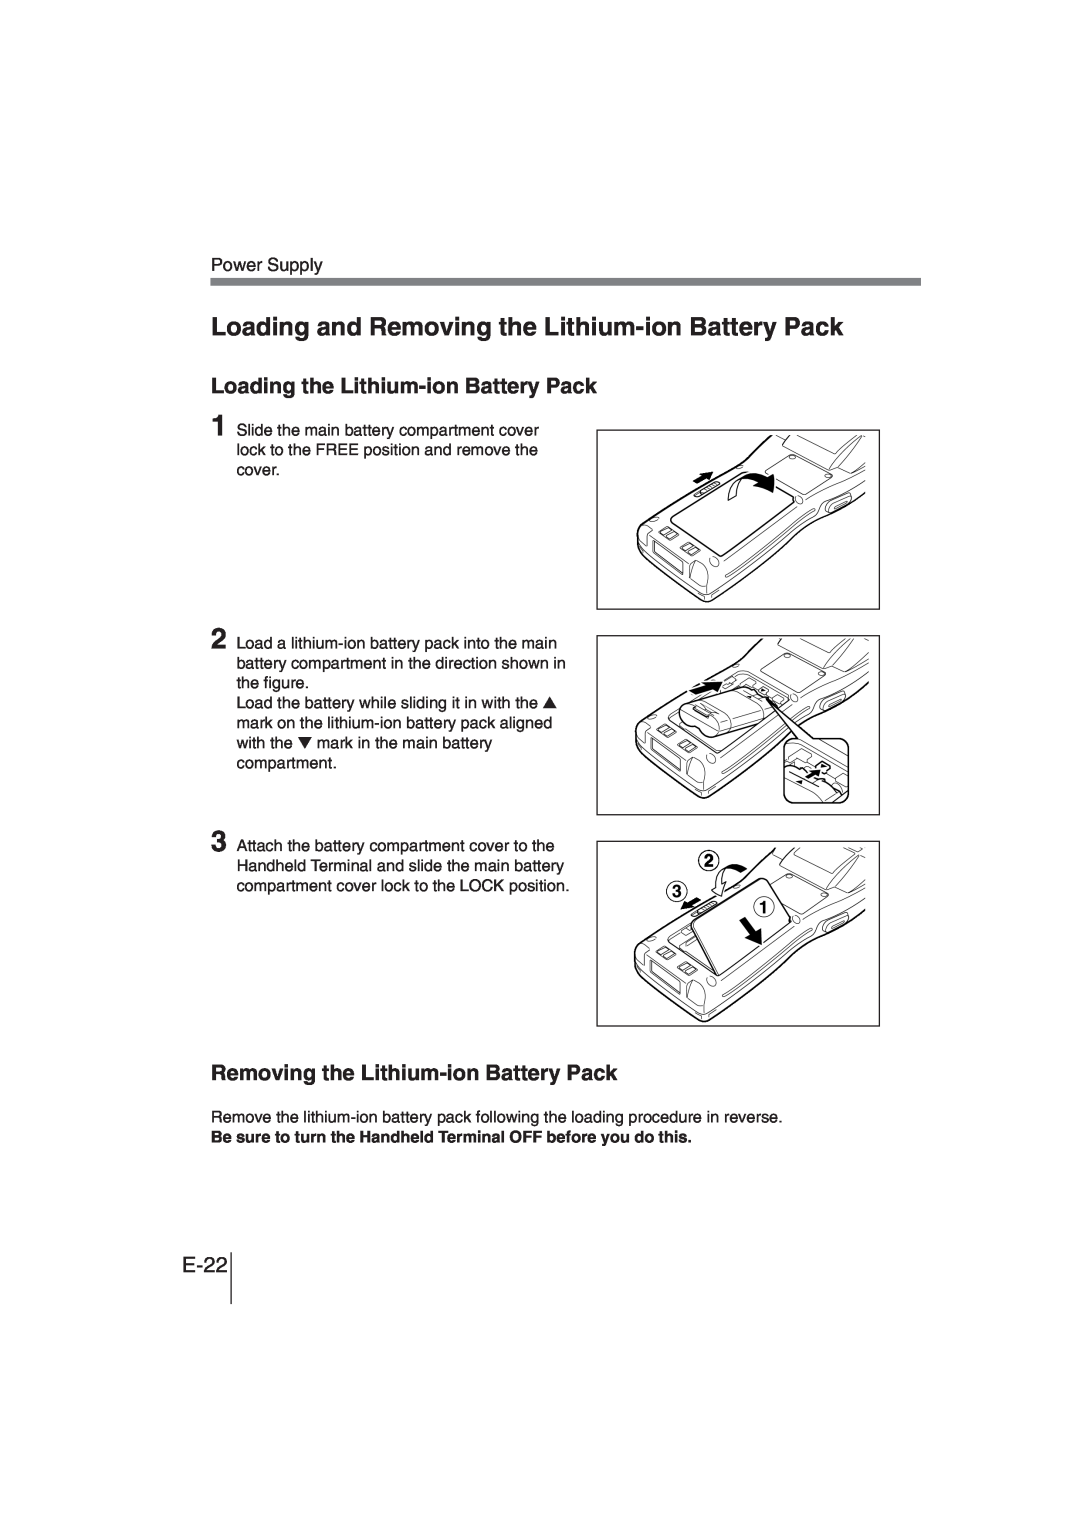 Casio DT-930 Loading and Removing the Lithium-ionBattery Pack, Loading the Lithium-ionBattery Pack, E-22, Power Supply 